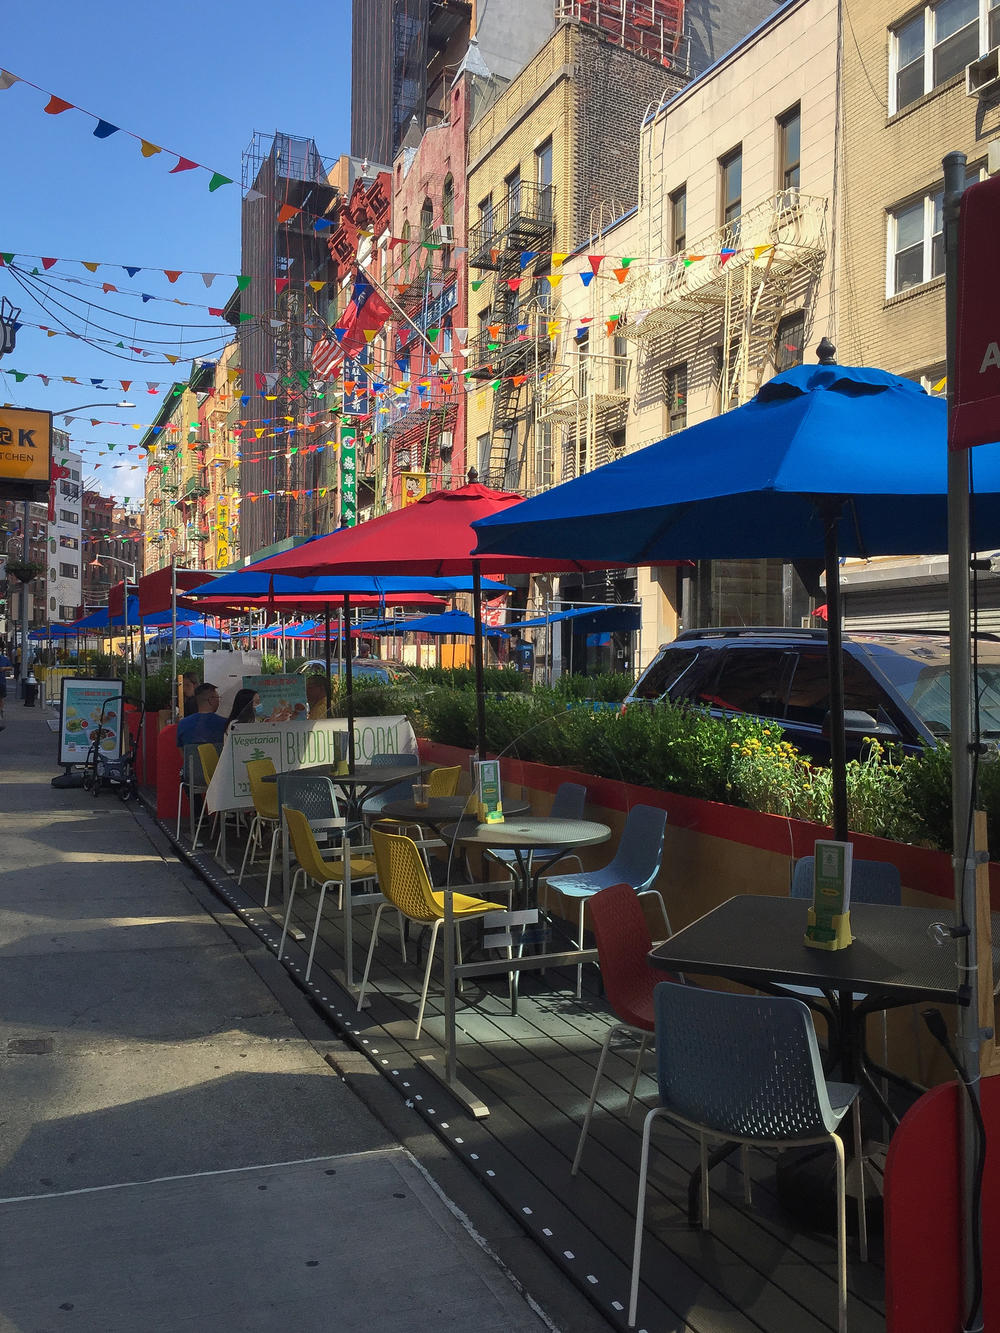 Many streets in New York City's Chinatown have narrow sidewalks. The Chinatown Business Improvement District restricted traffic on this street and created outdoor dining space.